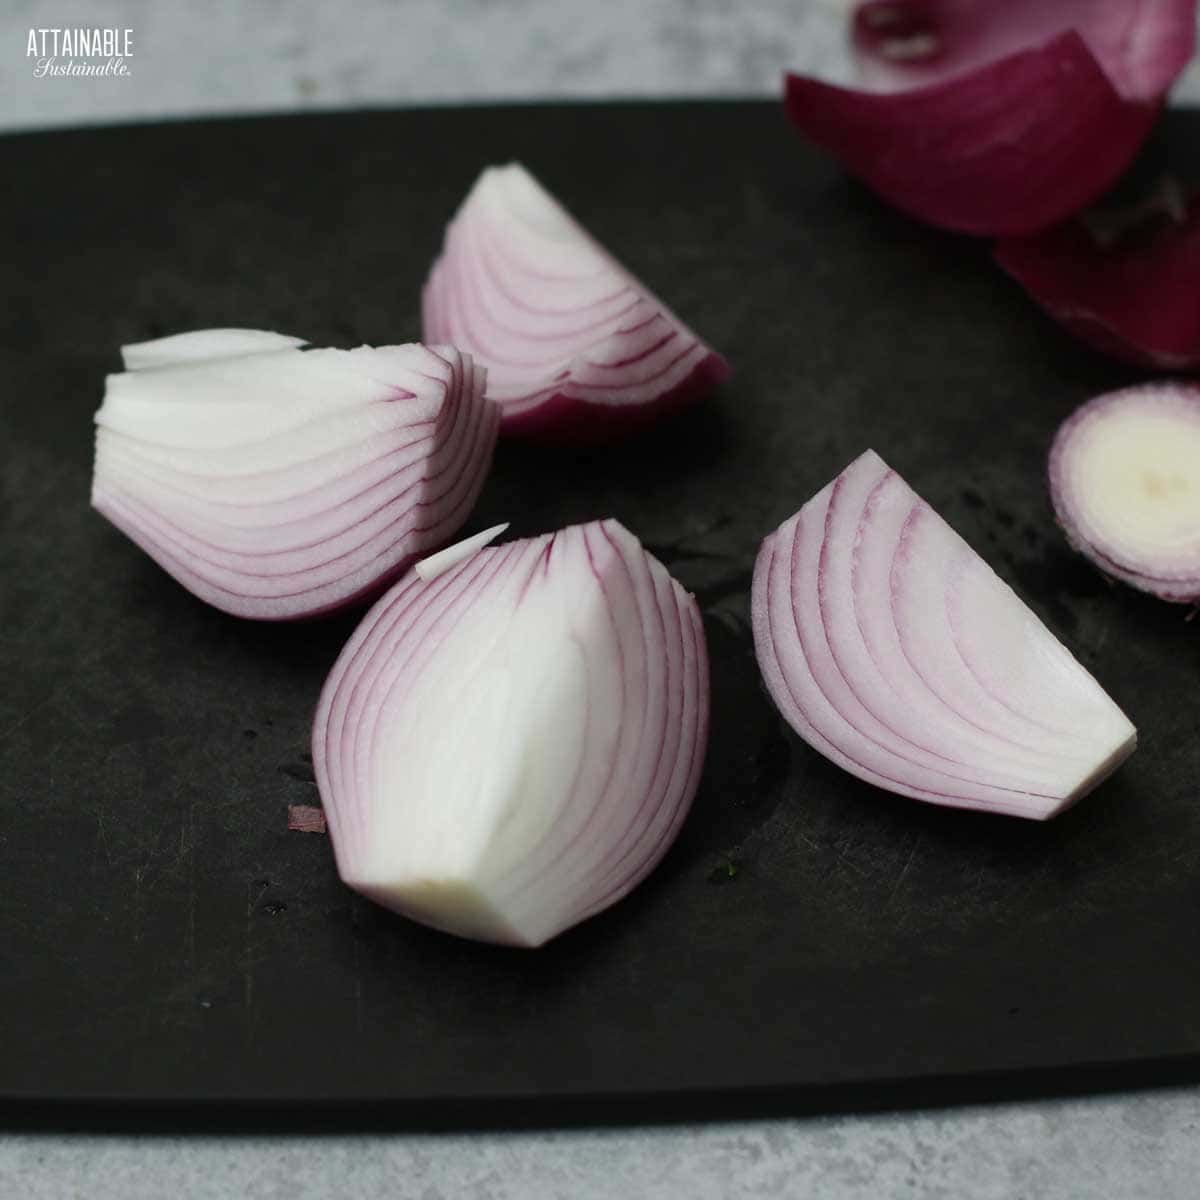 red onion cut into quarters.